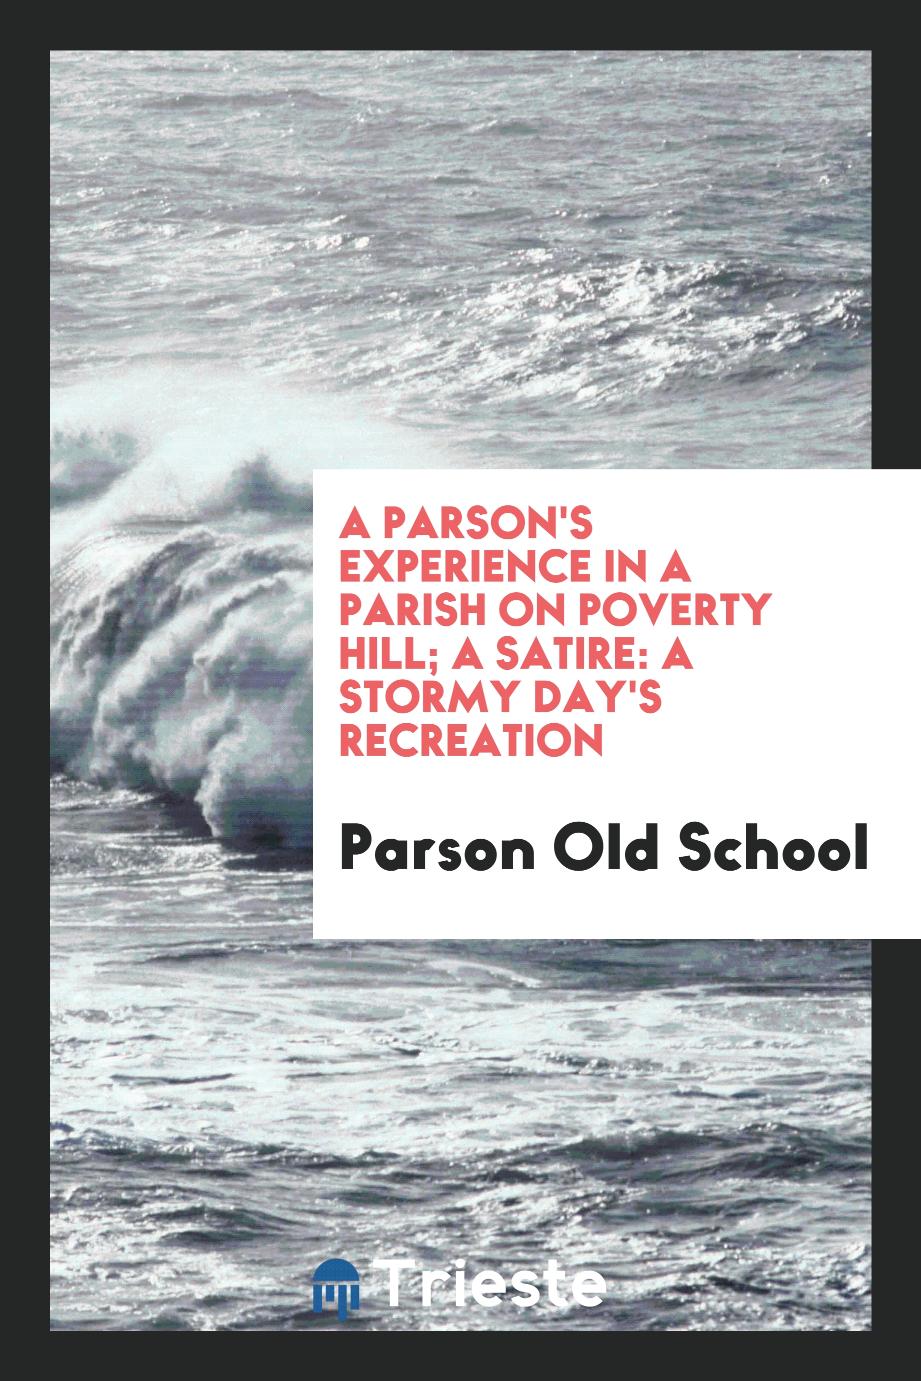 A parson's experience in a parish on Poverty Hill; A satire: a stormy day's recreation